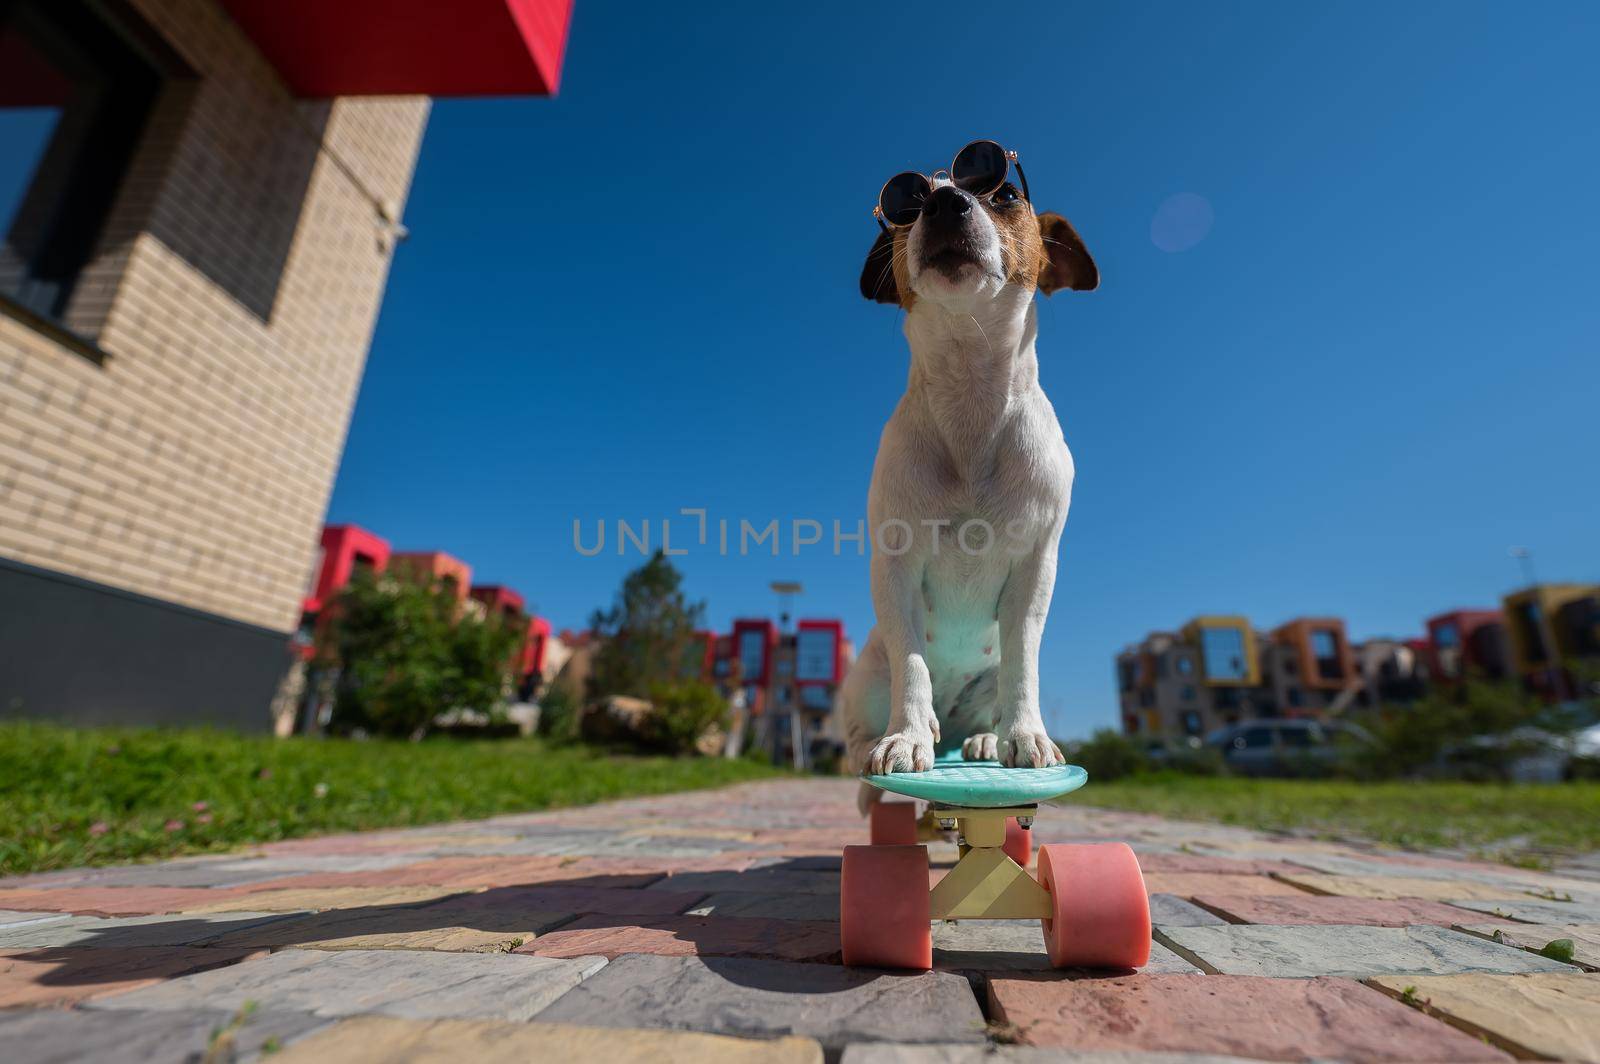 Jack russell terrier dog in sunglasses rides a skateboard outdoors on a sunny summer day. by mrwed54